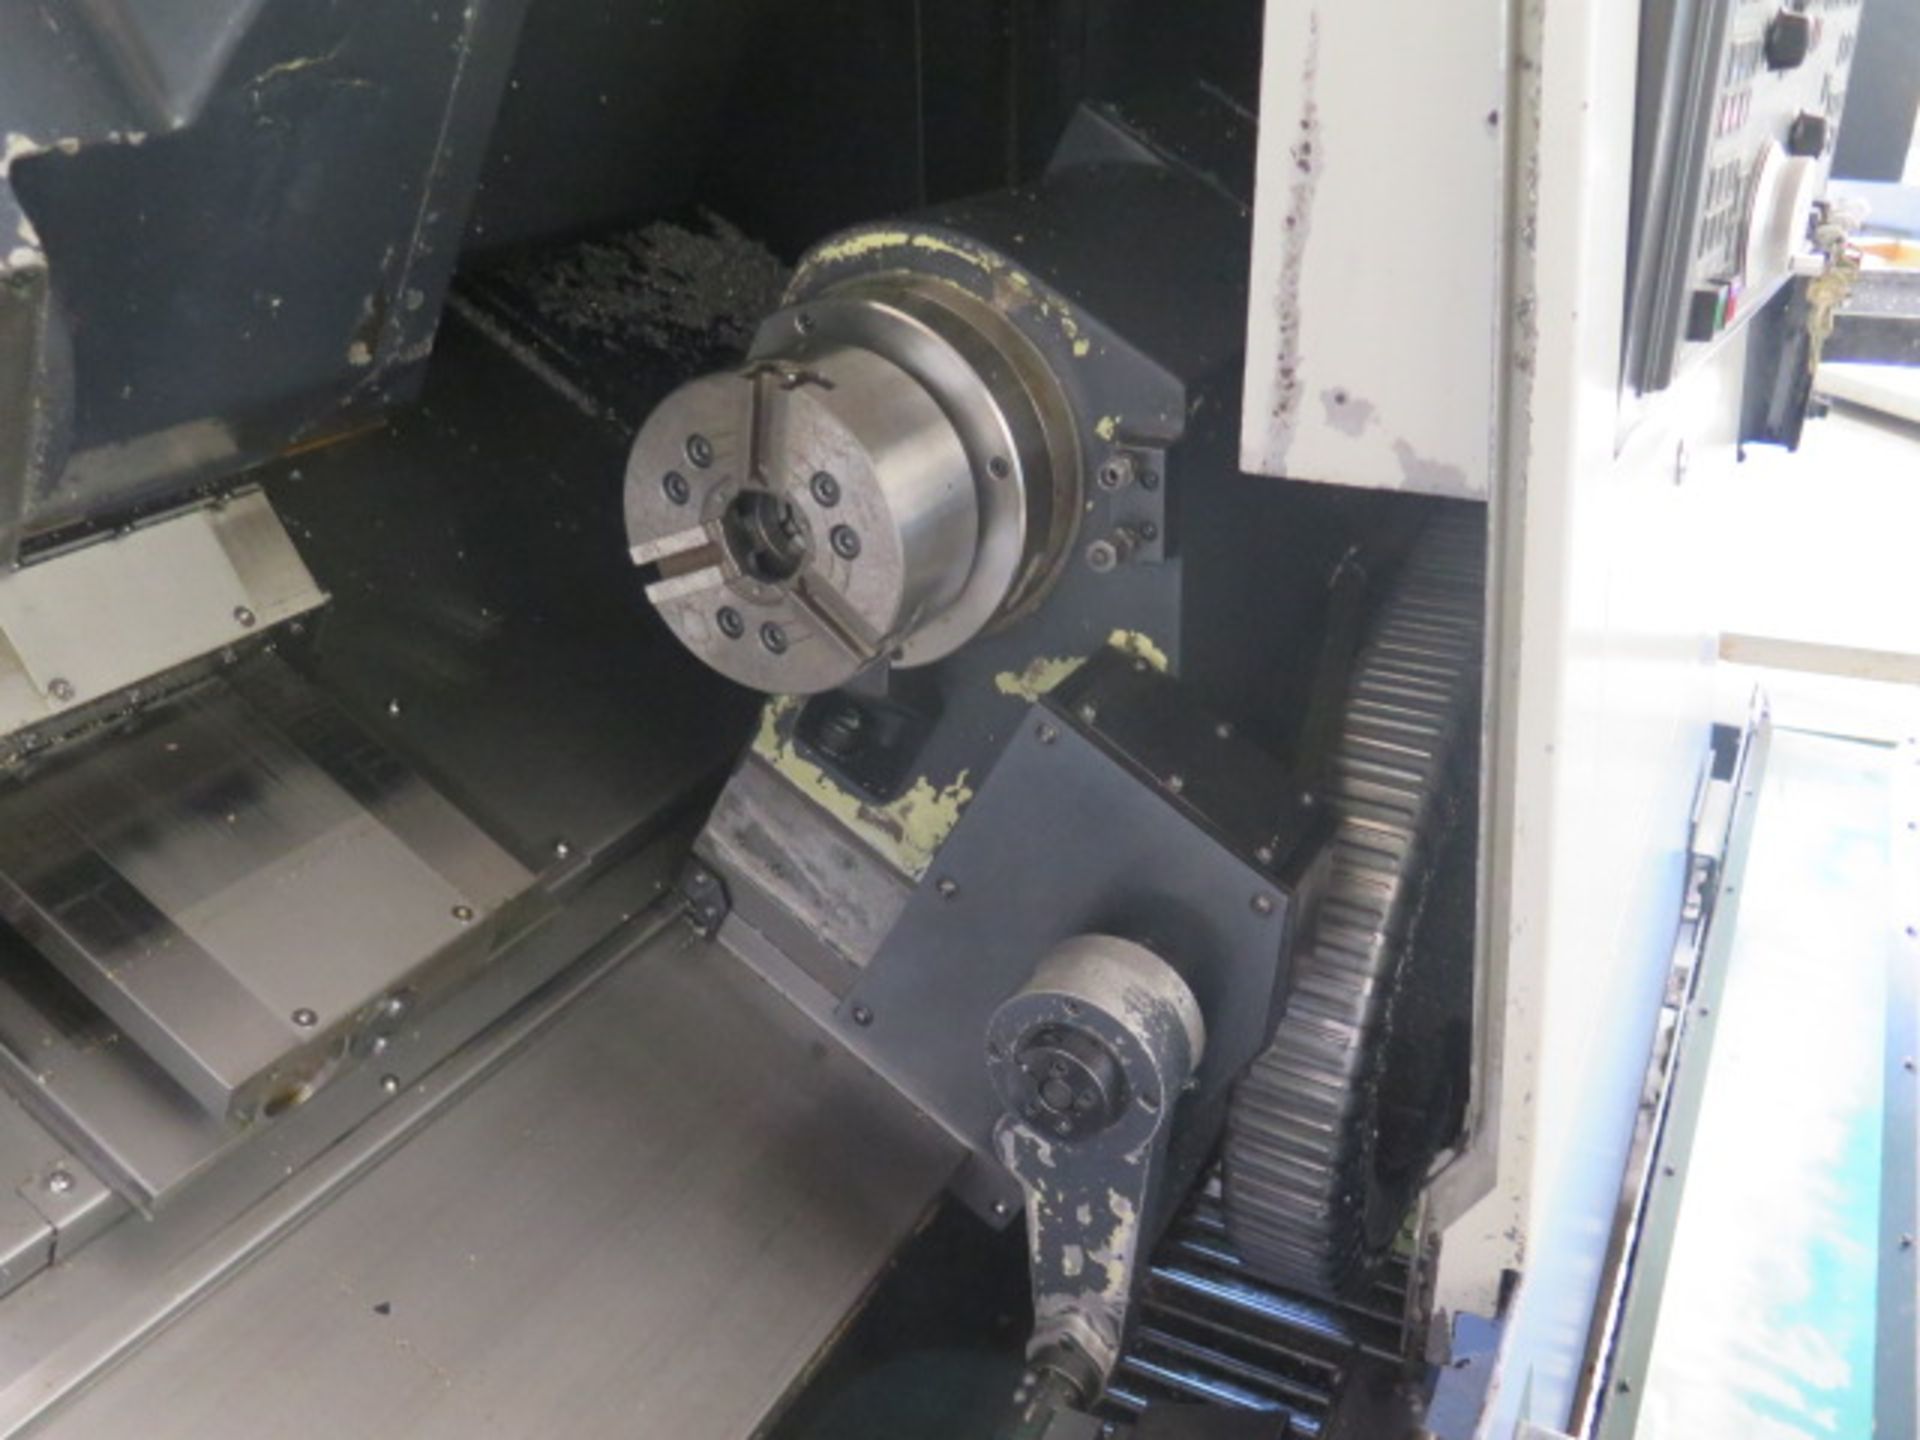 2008 Doosan PUMA 1500SY 5-Axis Twin Spindle Live Turret CNC Turning Center s/n P150SY1041,SOLD AS IS - Image 8 of 17